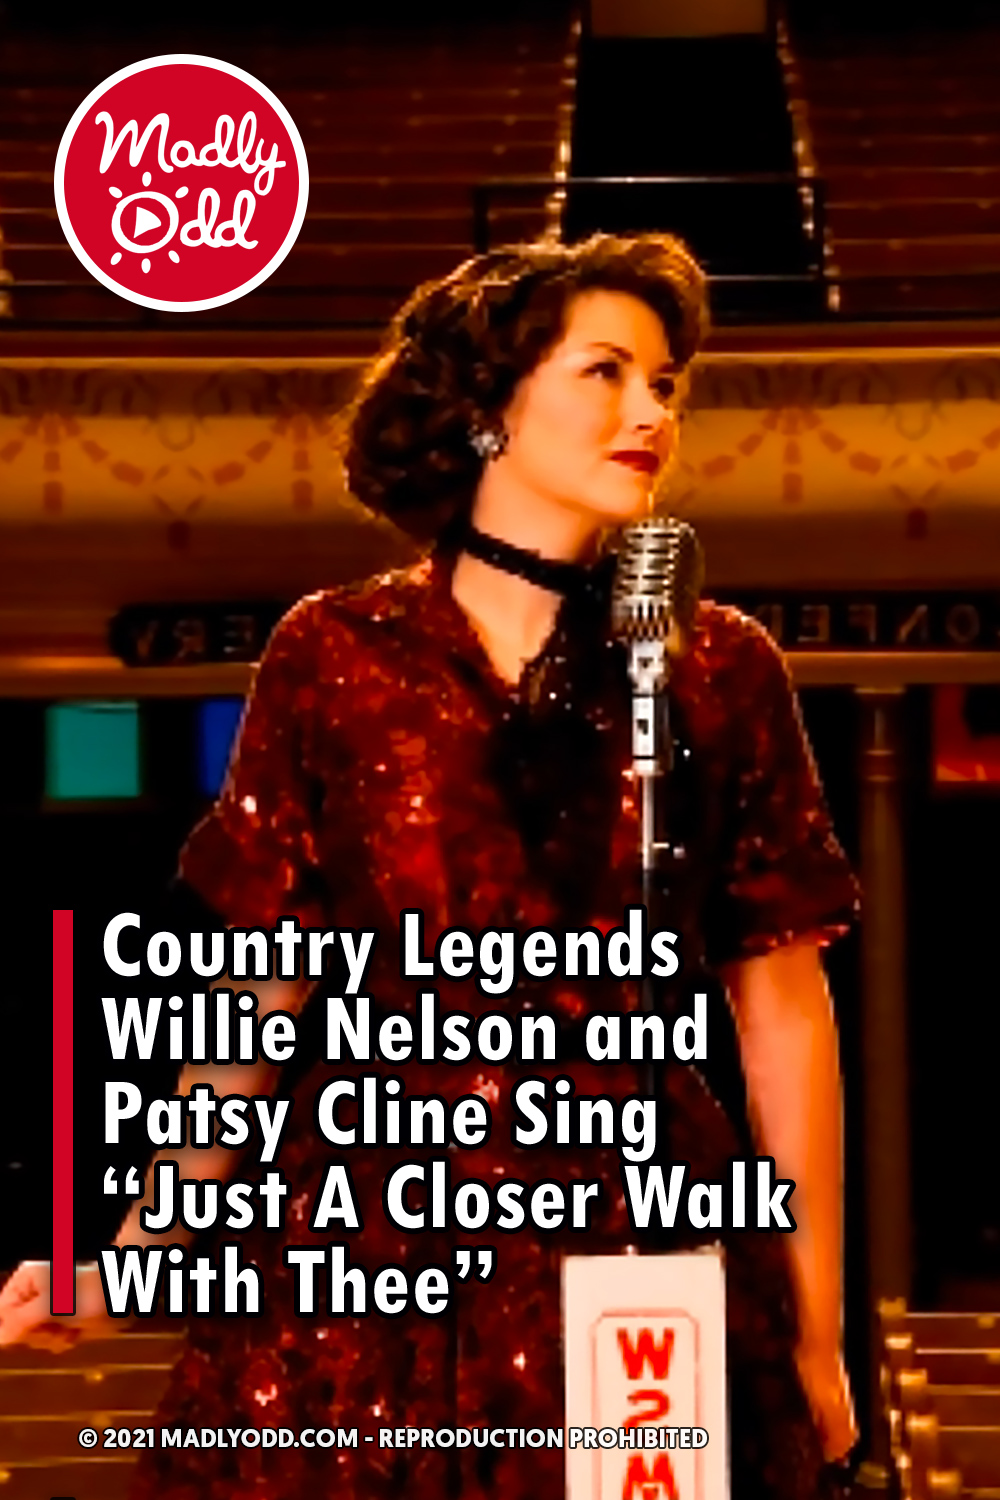 Country Legends Willie Nelson and Patsy Cline Sing “Just A Closer Walk With Thee”